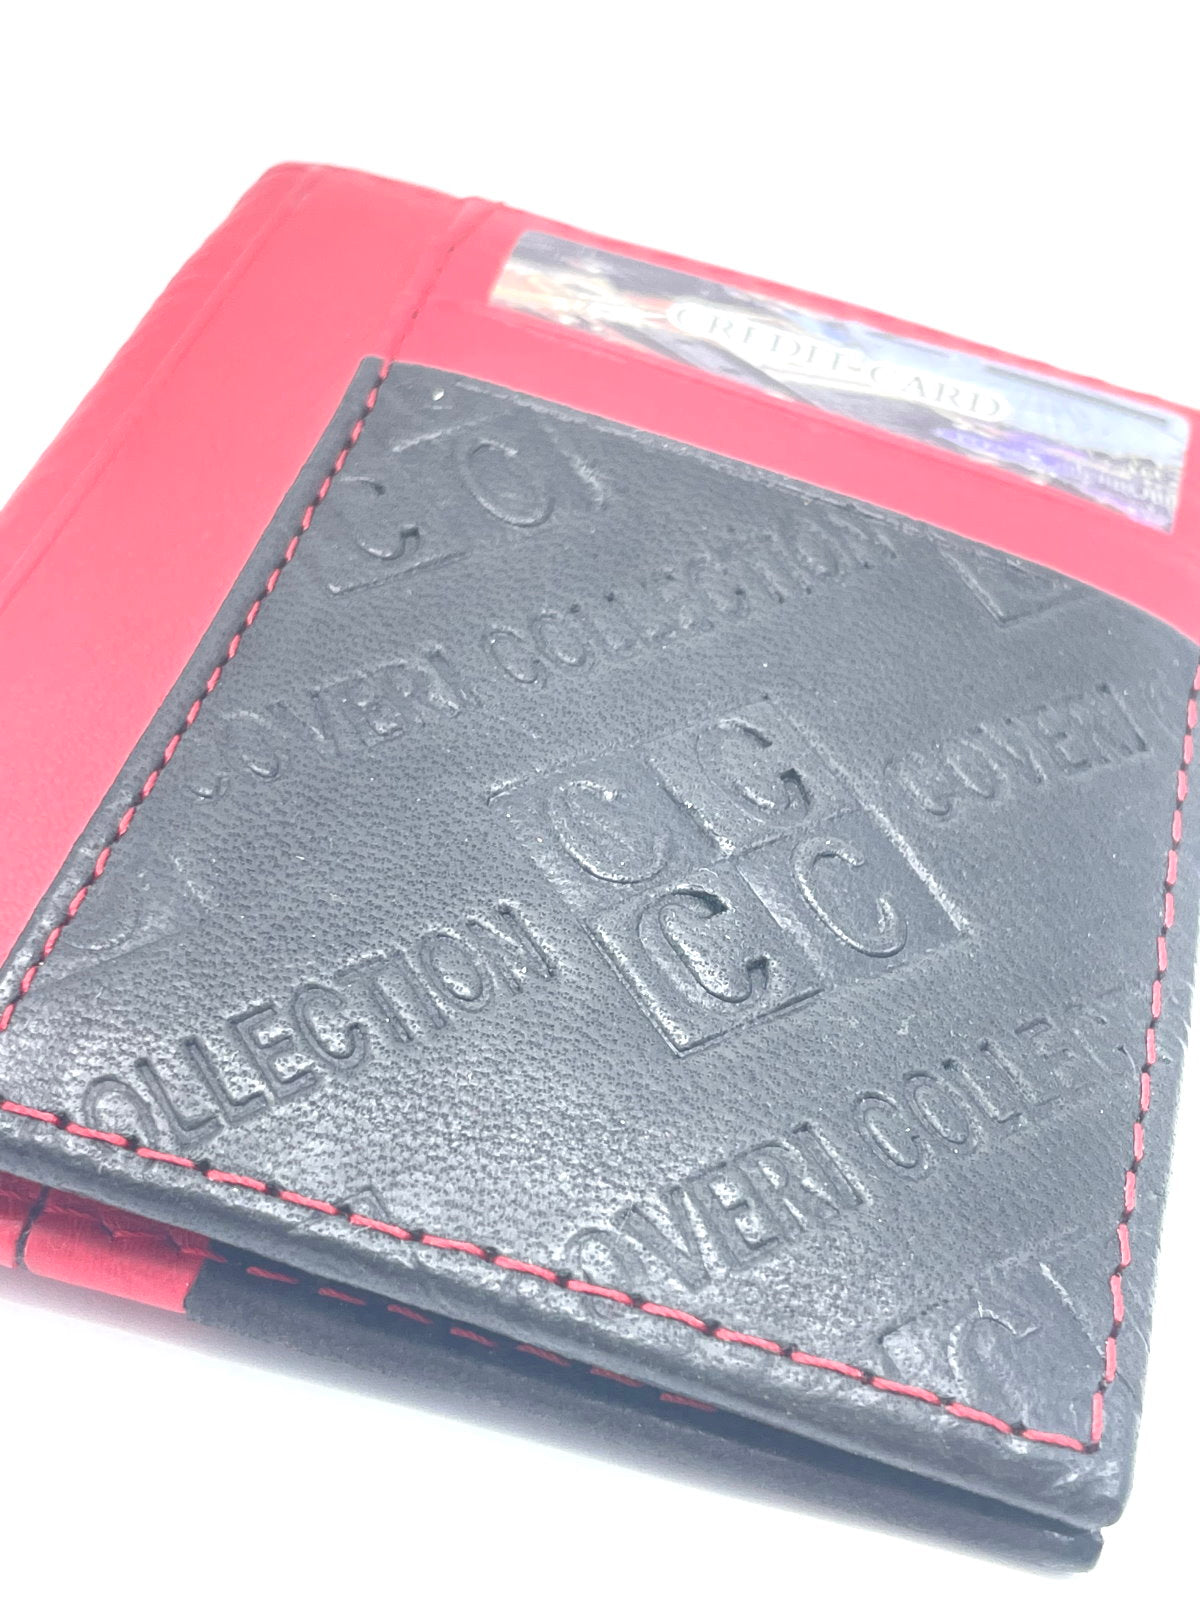 Genuine leather card holder for men, brand Coveri Collection, art. 517054.335